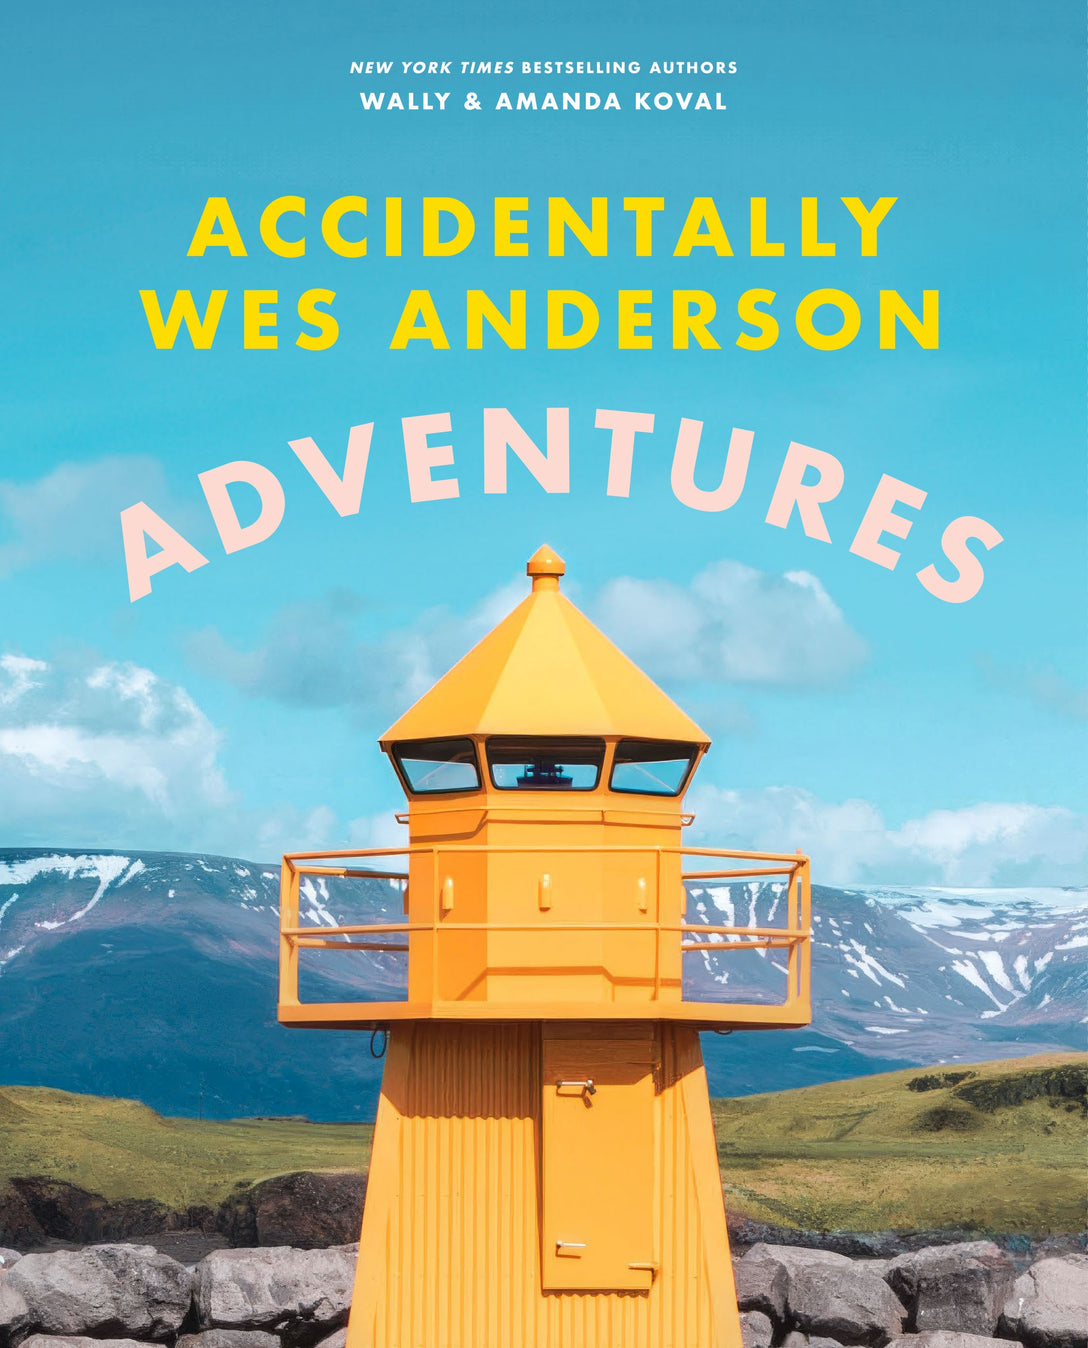 Accidentally Wes Anderson: Adventures by Wally Koval, Amanda Koval